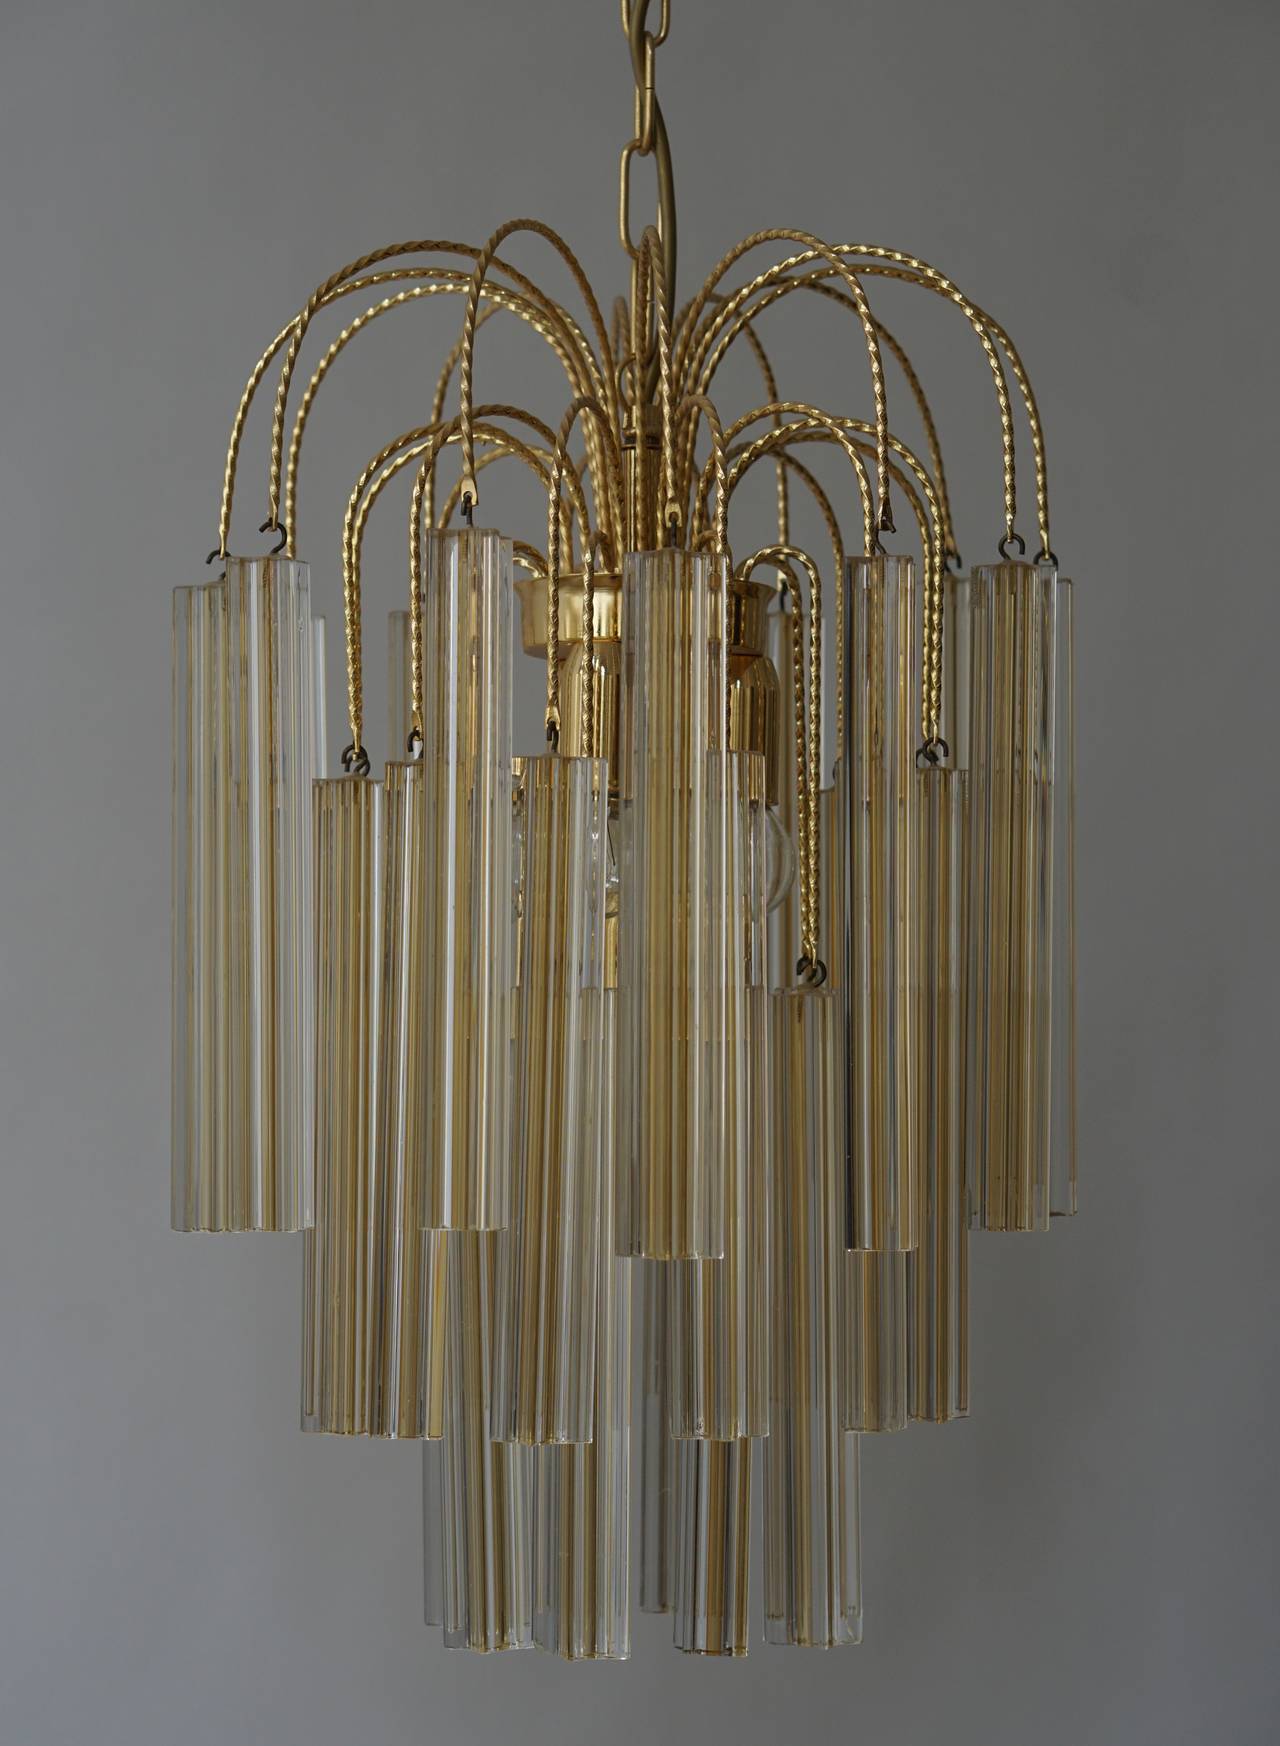 This exceptional Mid-Century pair of Modernist Camer chandeliers by Venini features 32 individually handmade Murano glass triedre prisms. 
The high quality crystal reflects the light beautifully with its elegant shape. This chandeliers has four